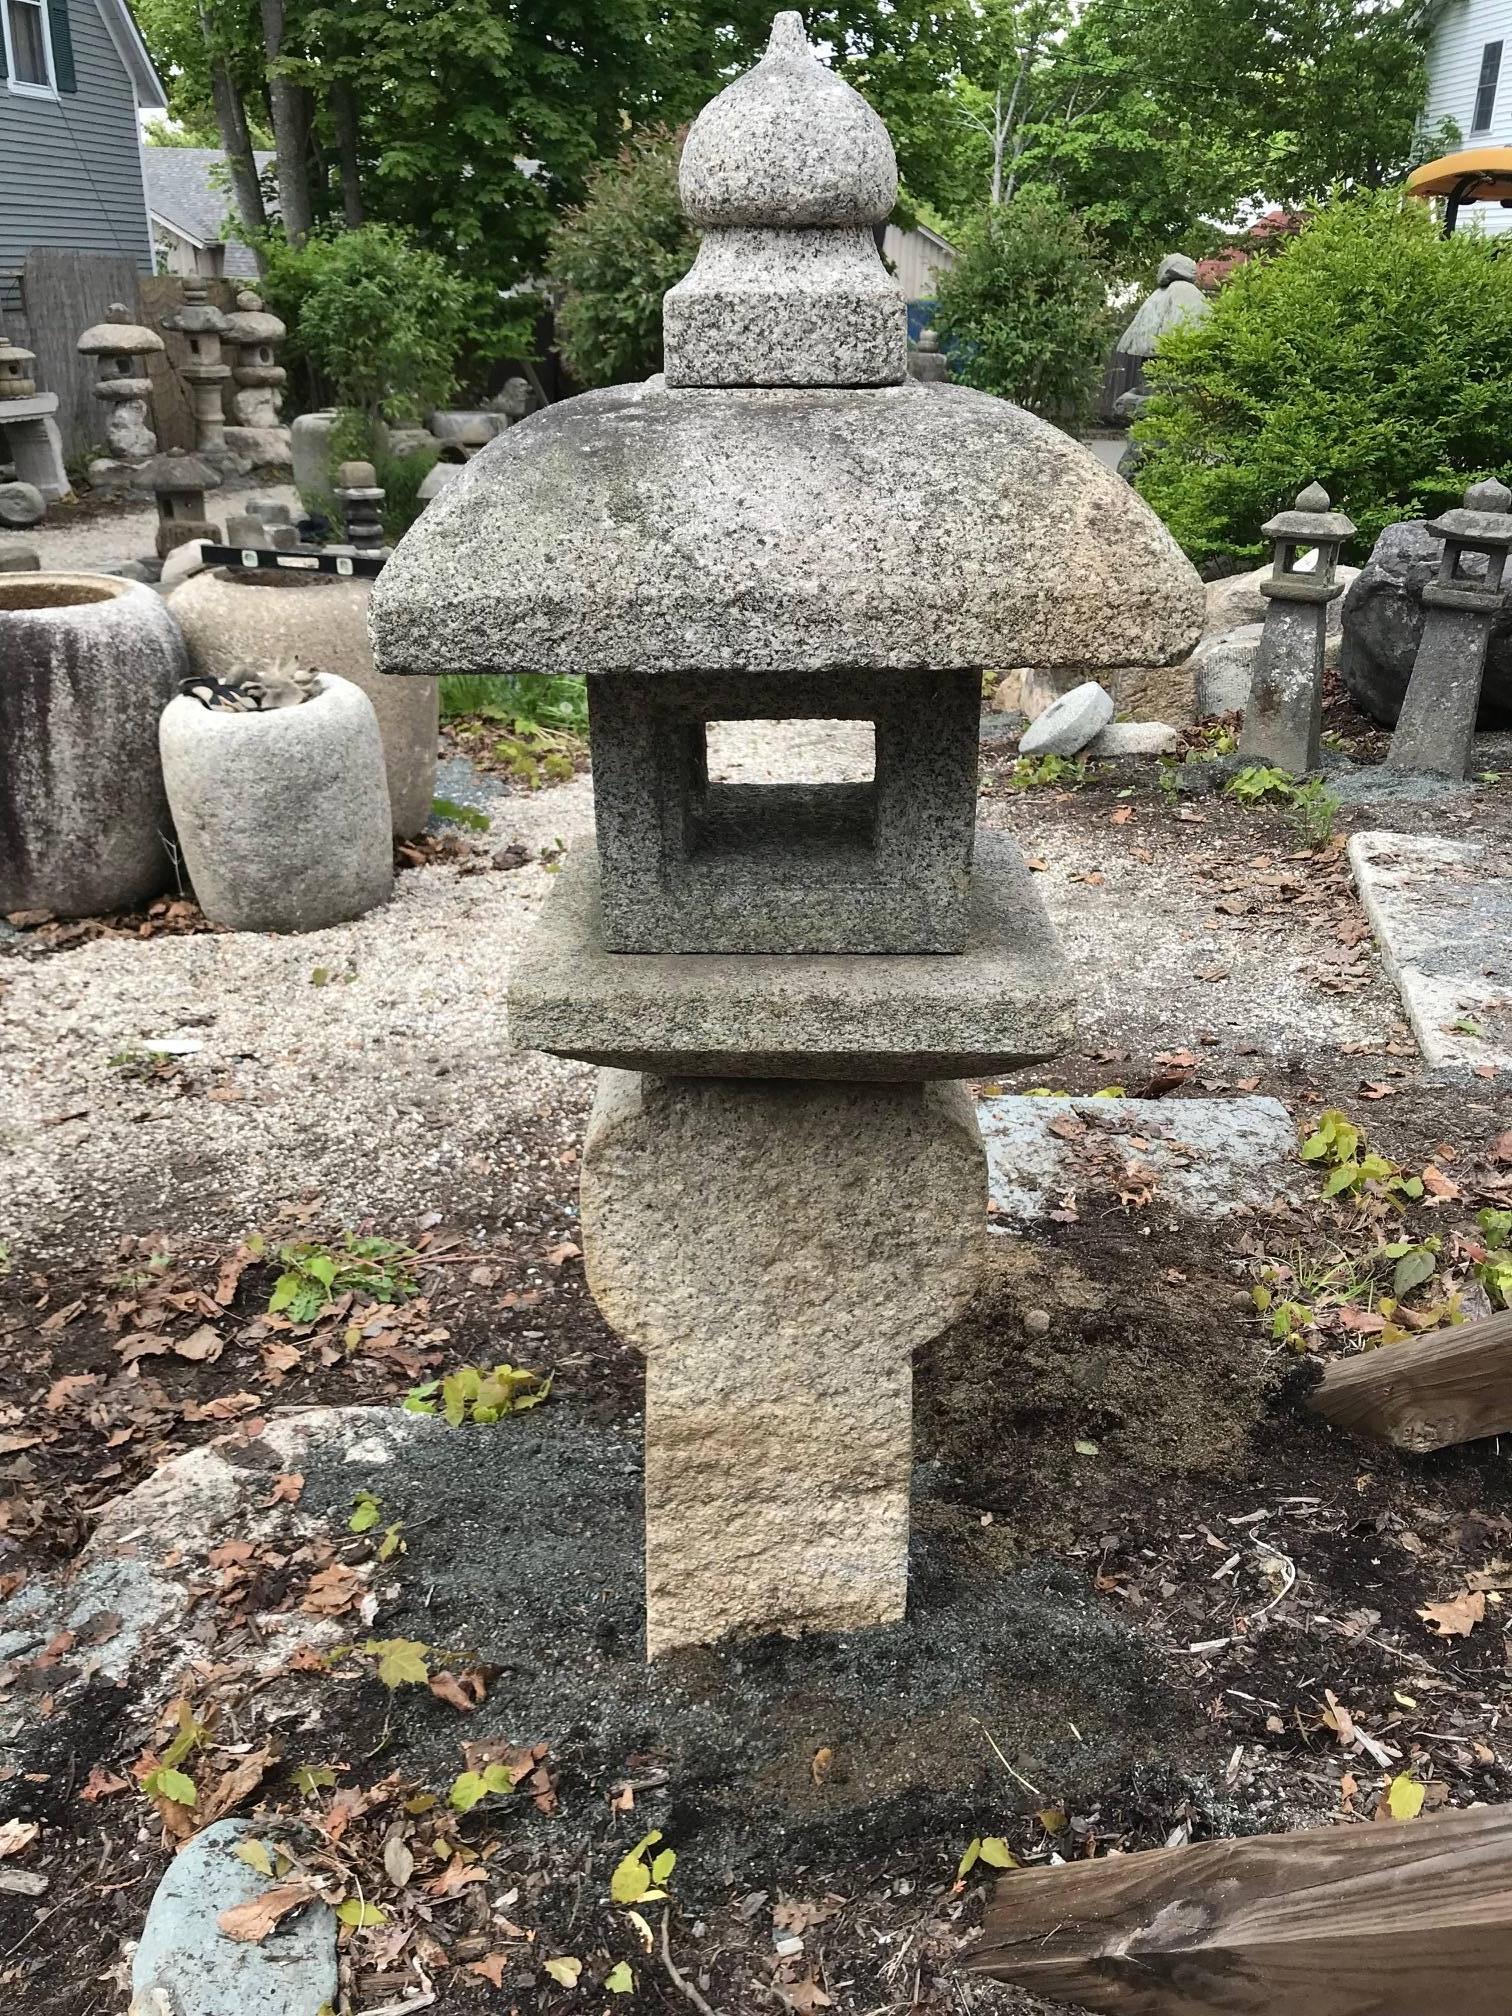 Japan “Oribe” granite stone lantern with a very nice warm patina from good age, early 20th century. This is the classic Tea Master Oribe's style first observed in about the 17th century. Oribe was a leading 17th century Japanese tea master and